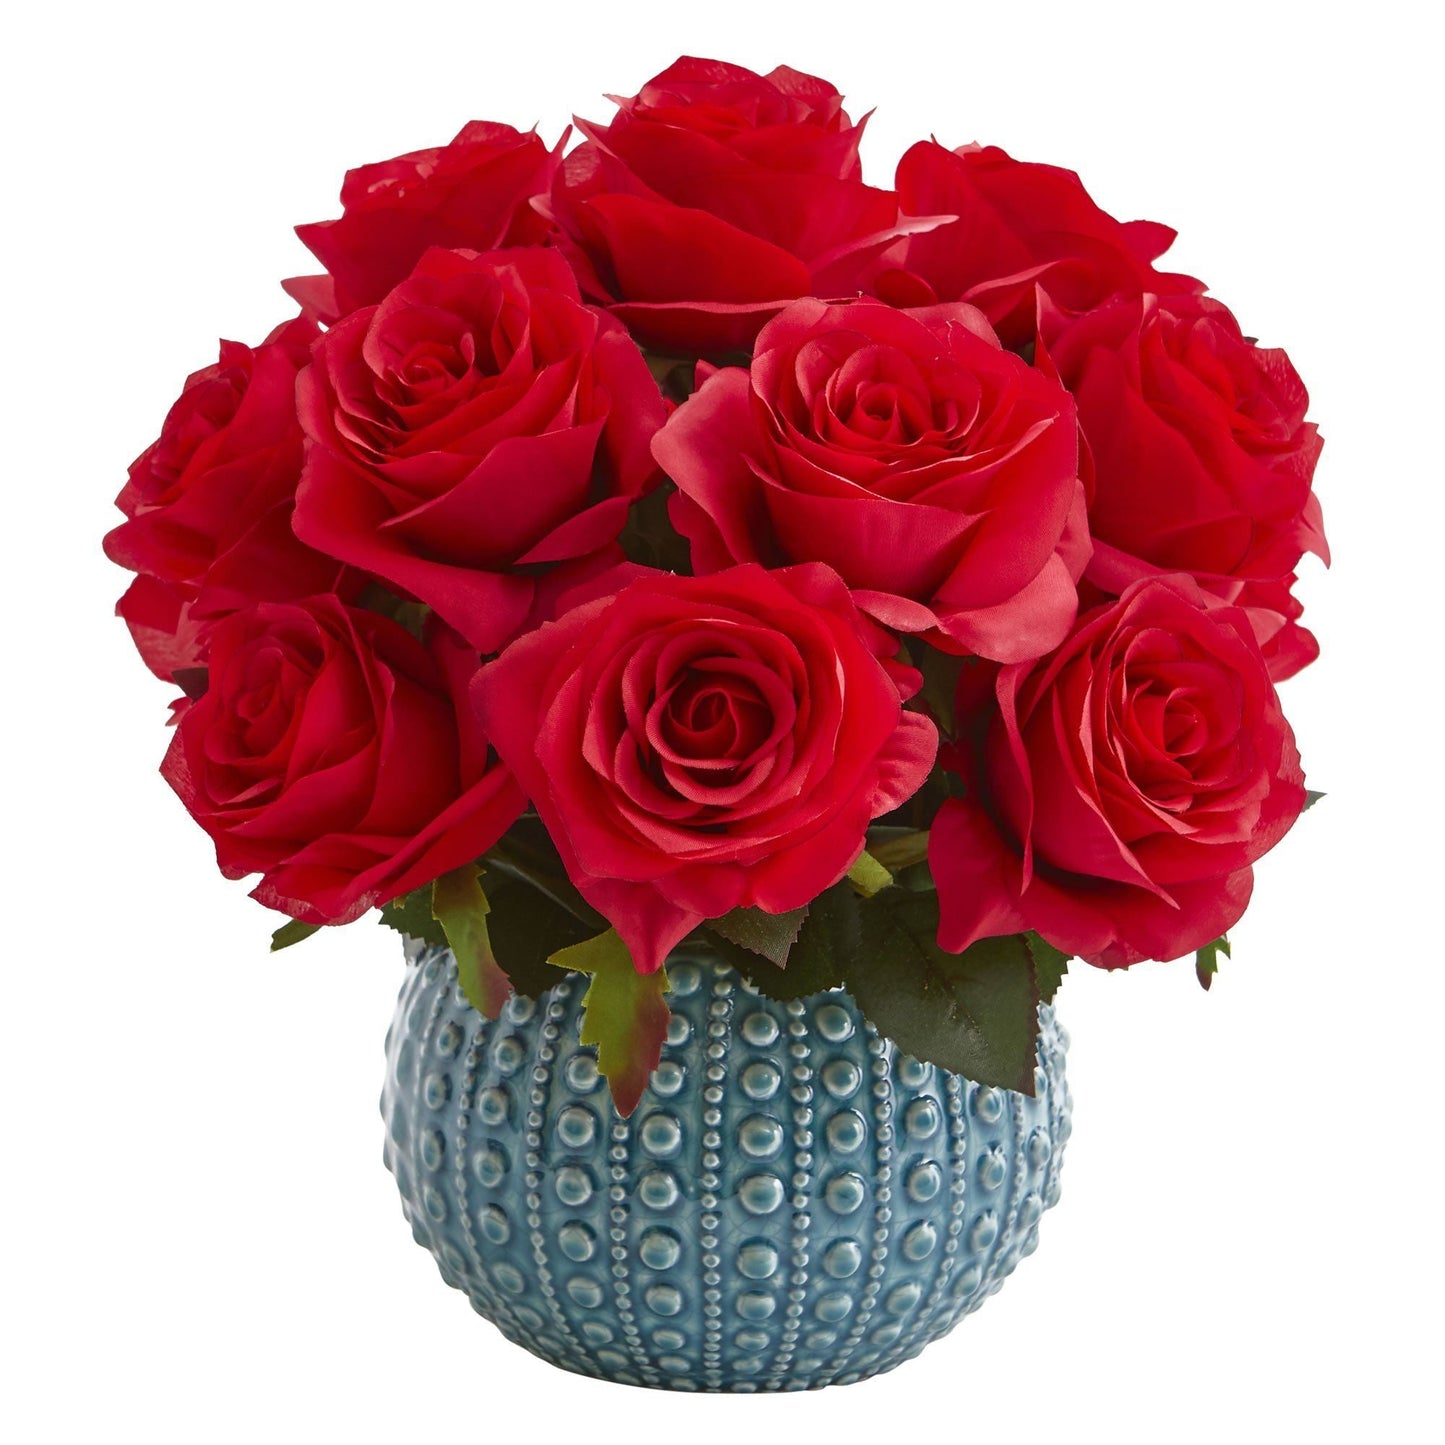 11.5’’ Rose Artificial Arrangement in Blue Ceramic Vase by Nearly Natural